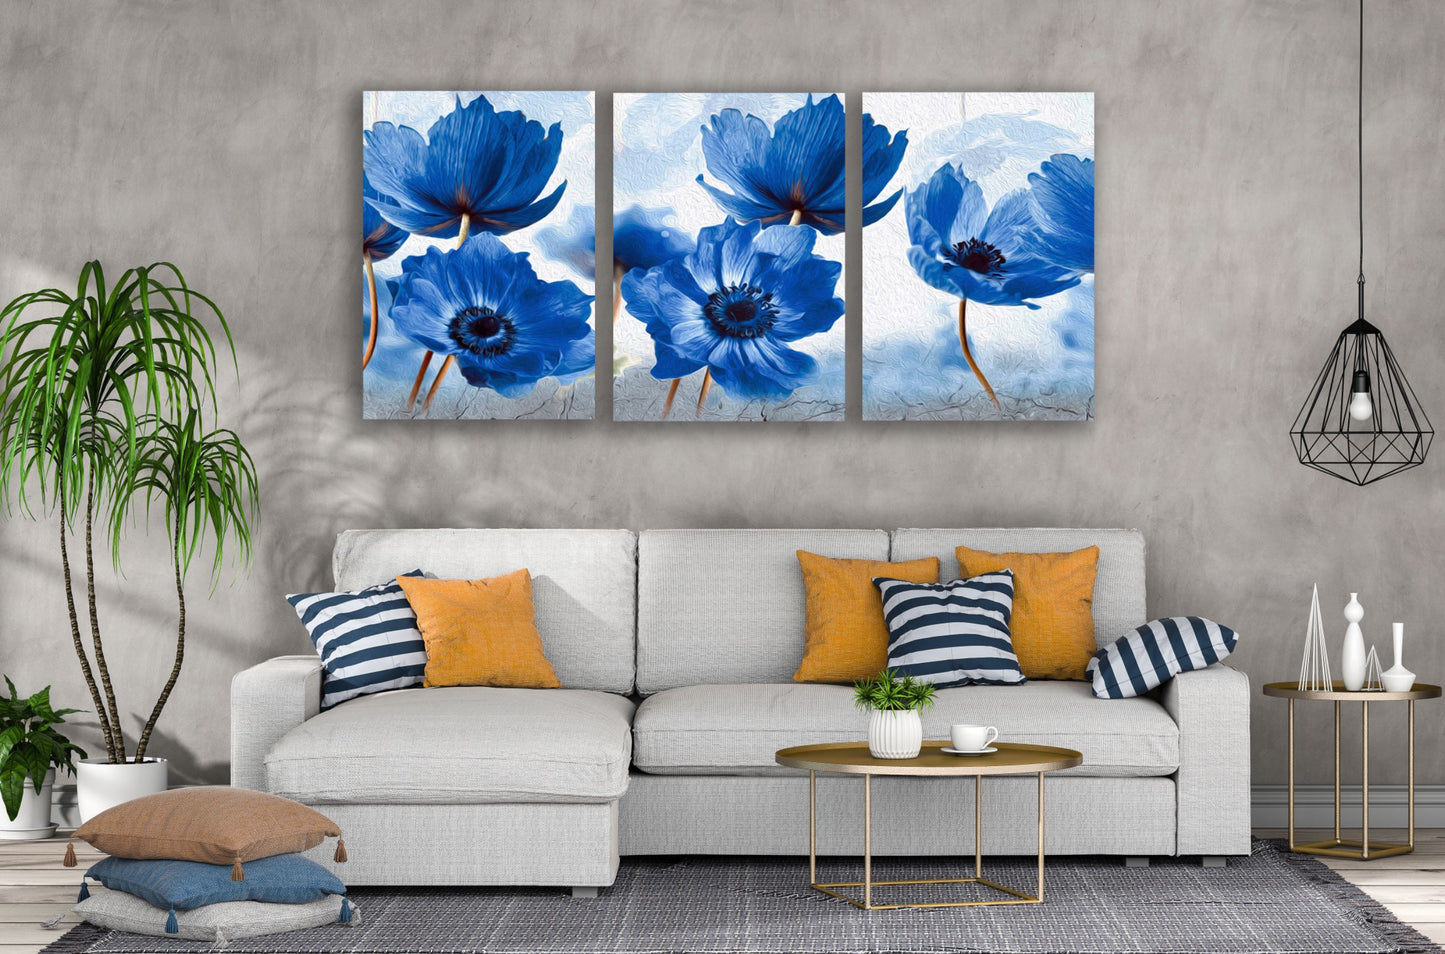 3 Set of Blue Floral Painting High Quality Print 100% Australian Made Wall Canvas Ready to Hang